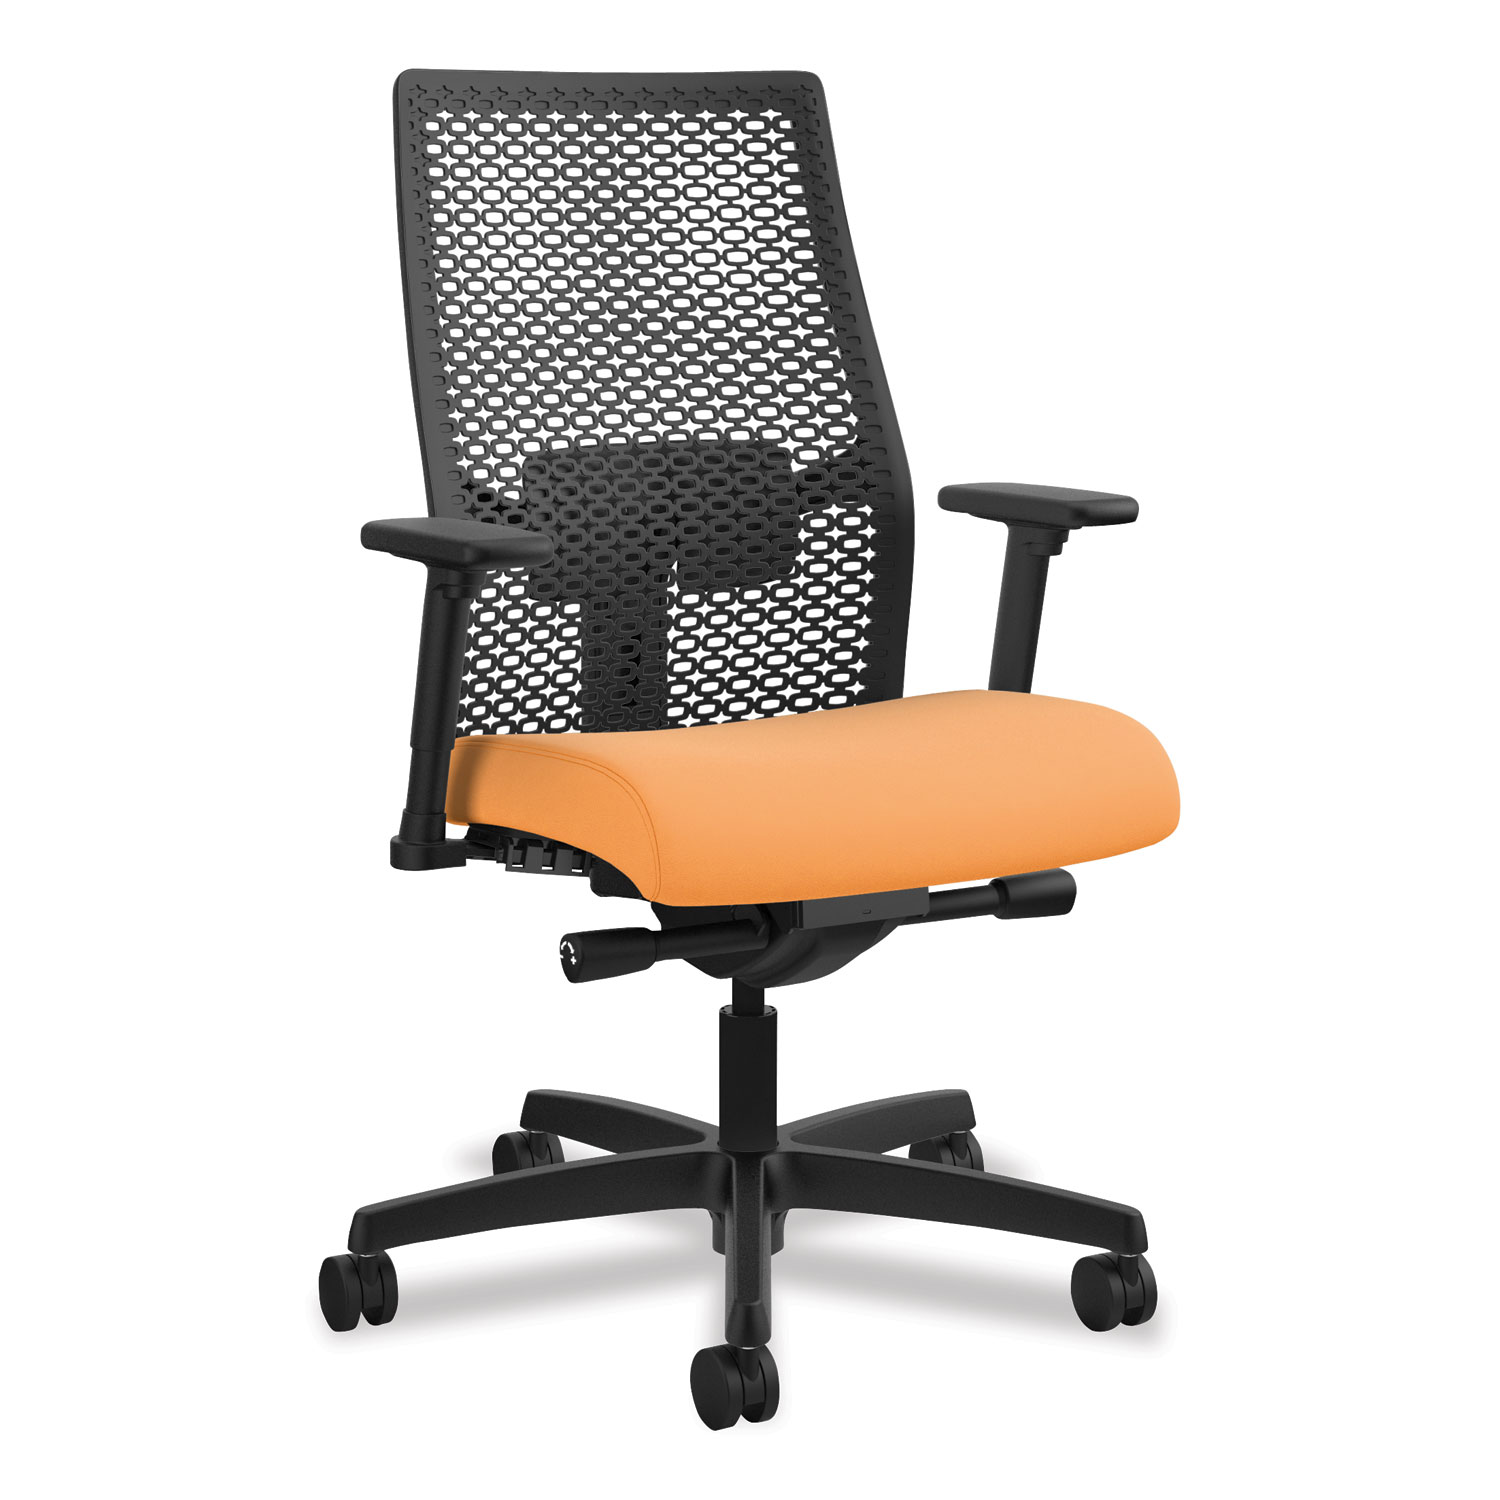  HON HONI2MRL2AC47TK Ignition 2.0 Reactiv Mid-Back Task Chair, Supports up to 300 lbs., Apricot Seat, Black Back, Black Base (HONI2MRL2AC47TK) 